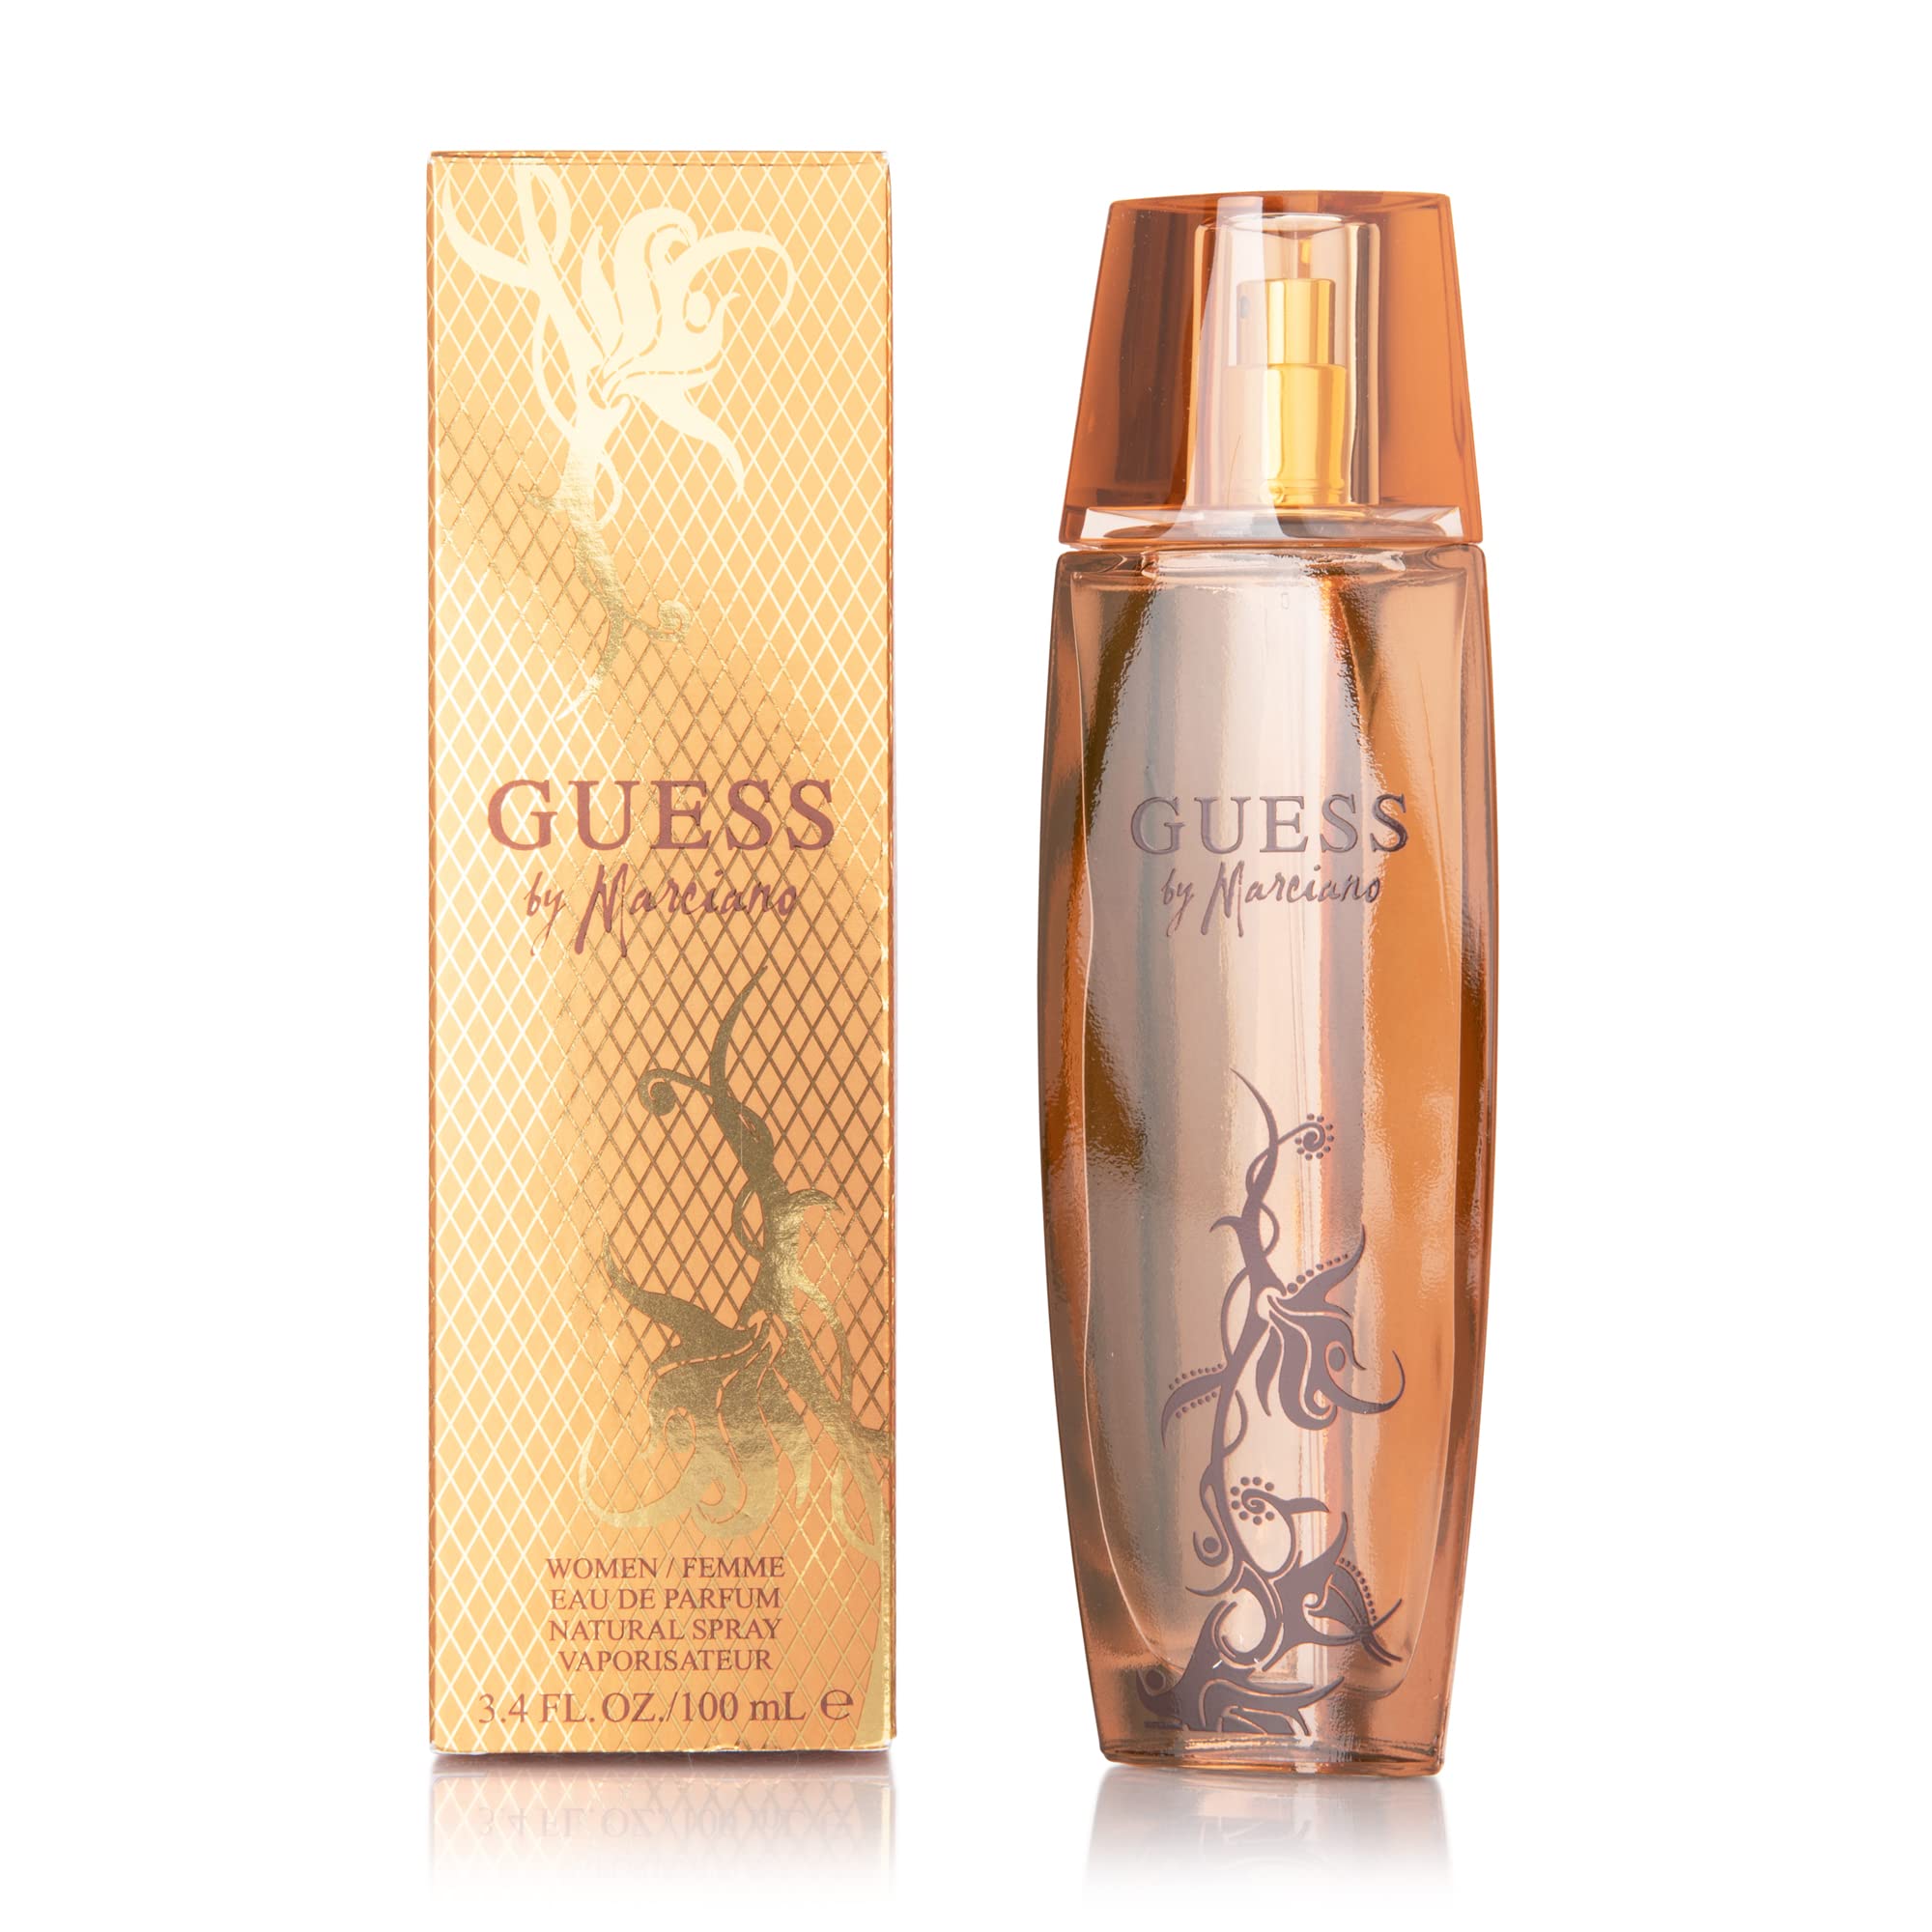 Populaire Guess By Marciano Woman Ep 100 Vp 6ALPqFiJR pas cher